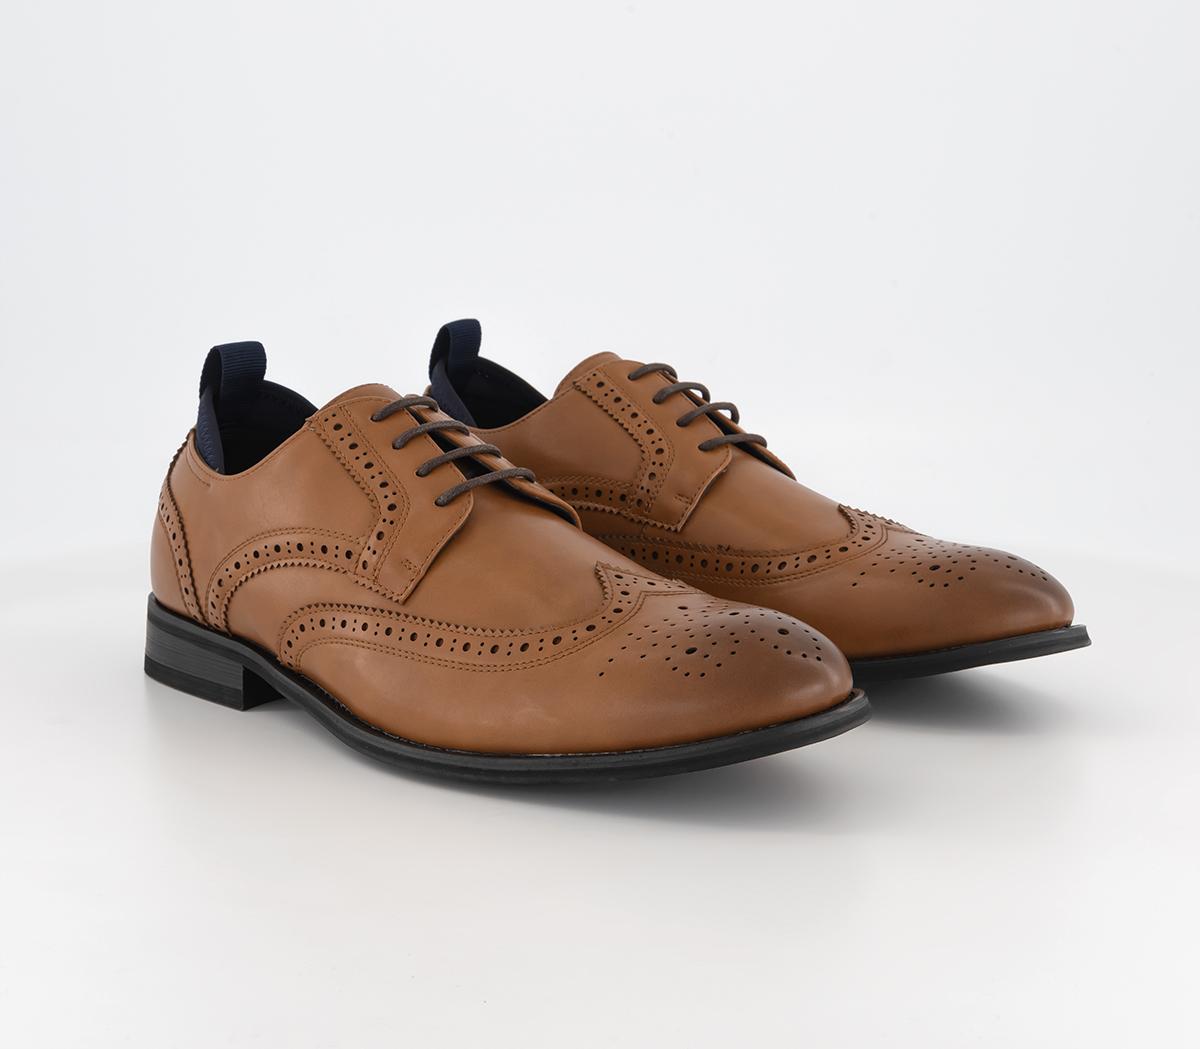 OFFICE Mens Montgomery Brogue Derby Shoes Tan, 9